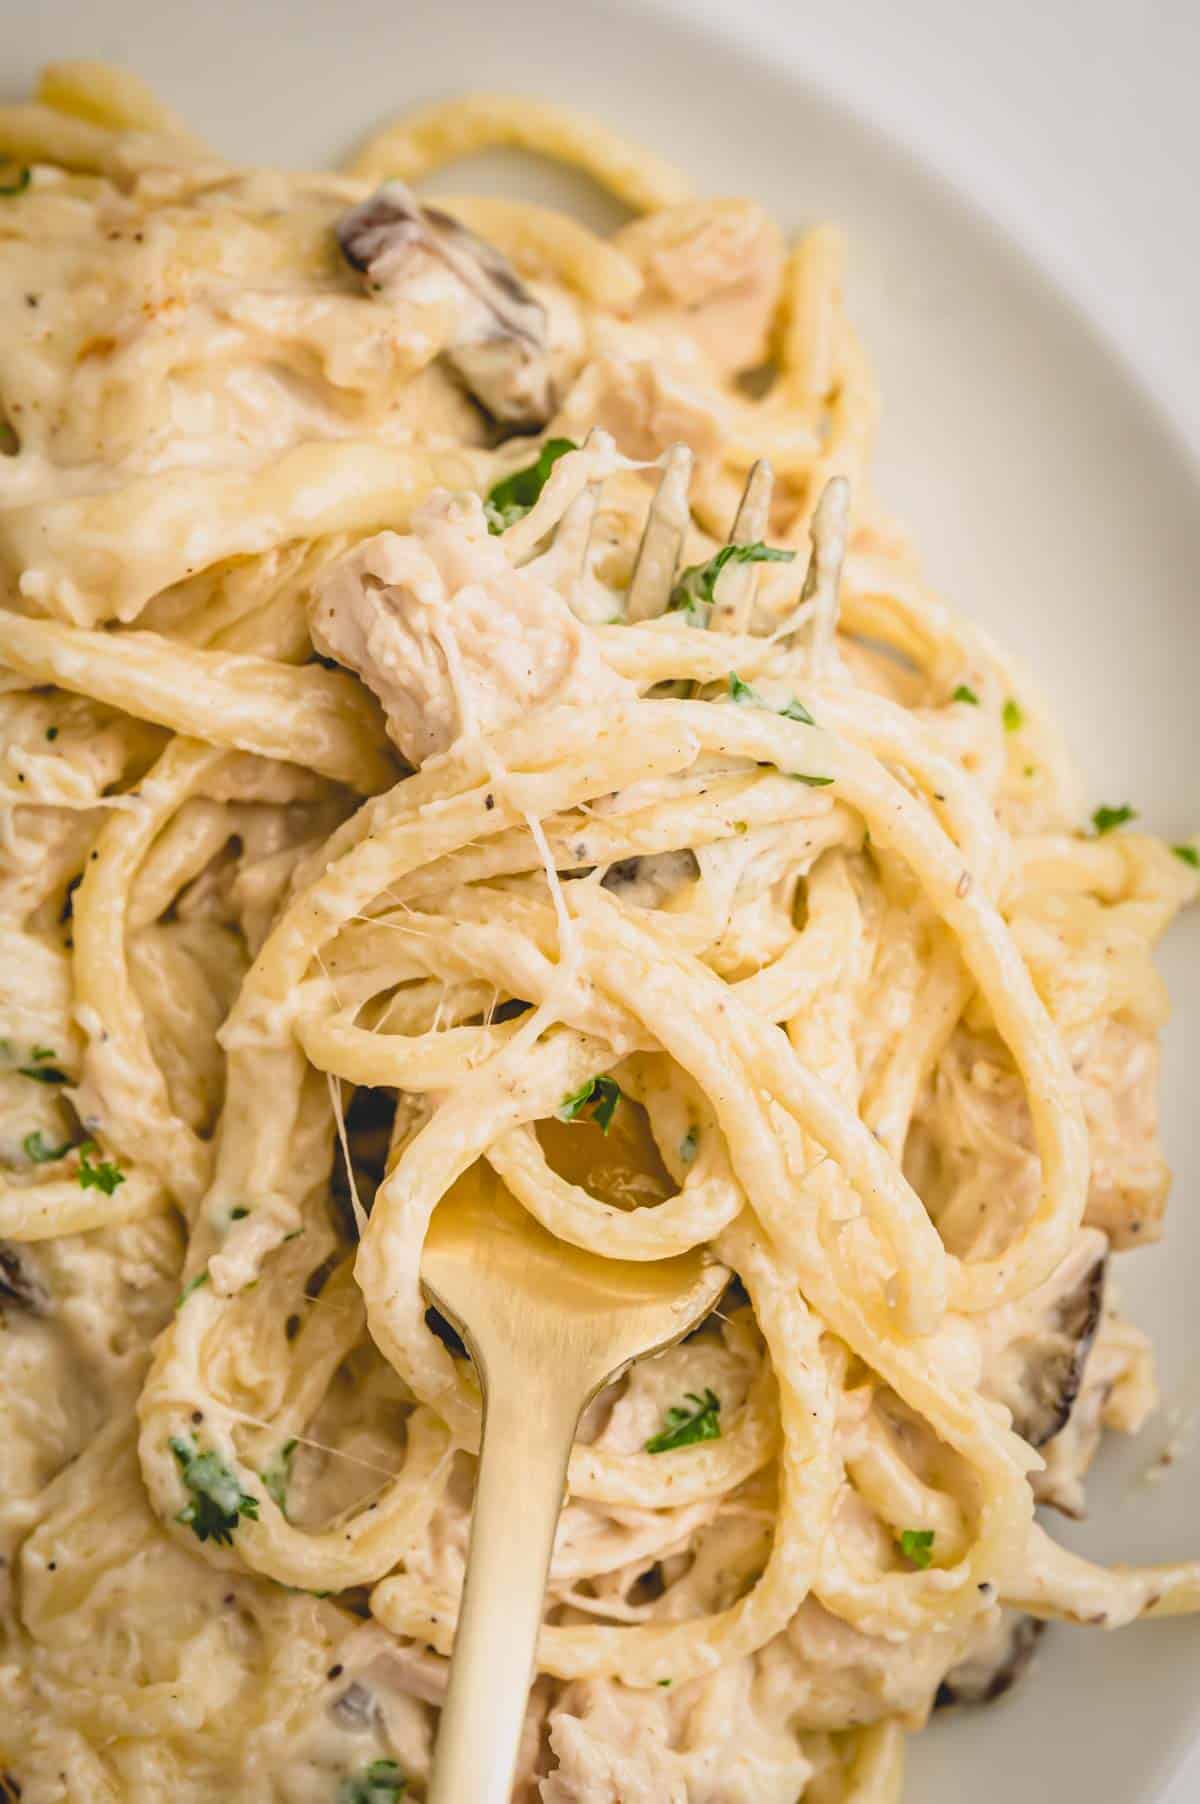 Turkey tetrazzini on plate with a fork.